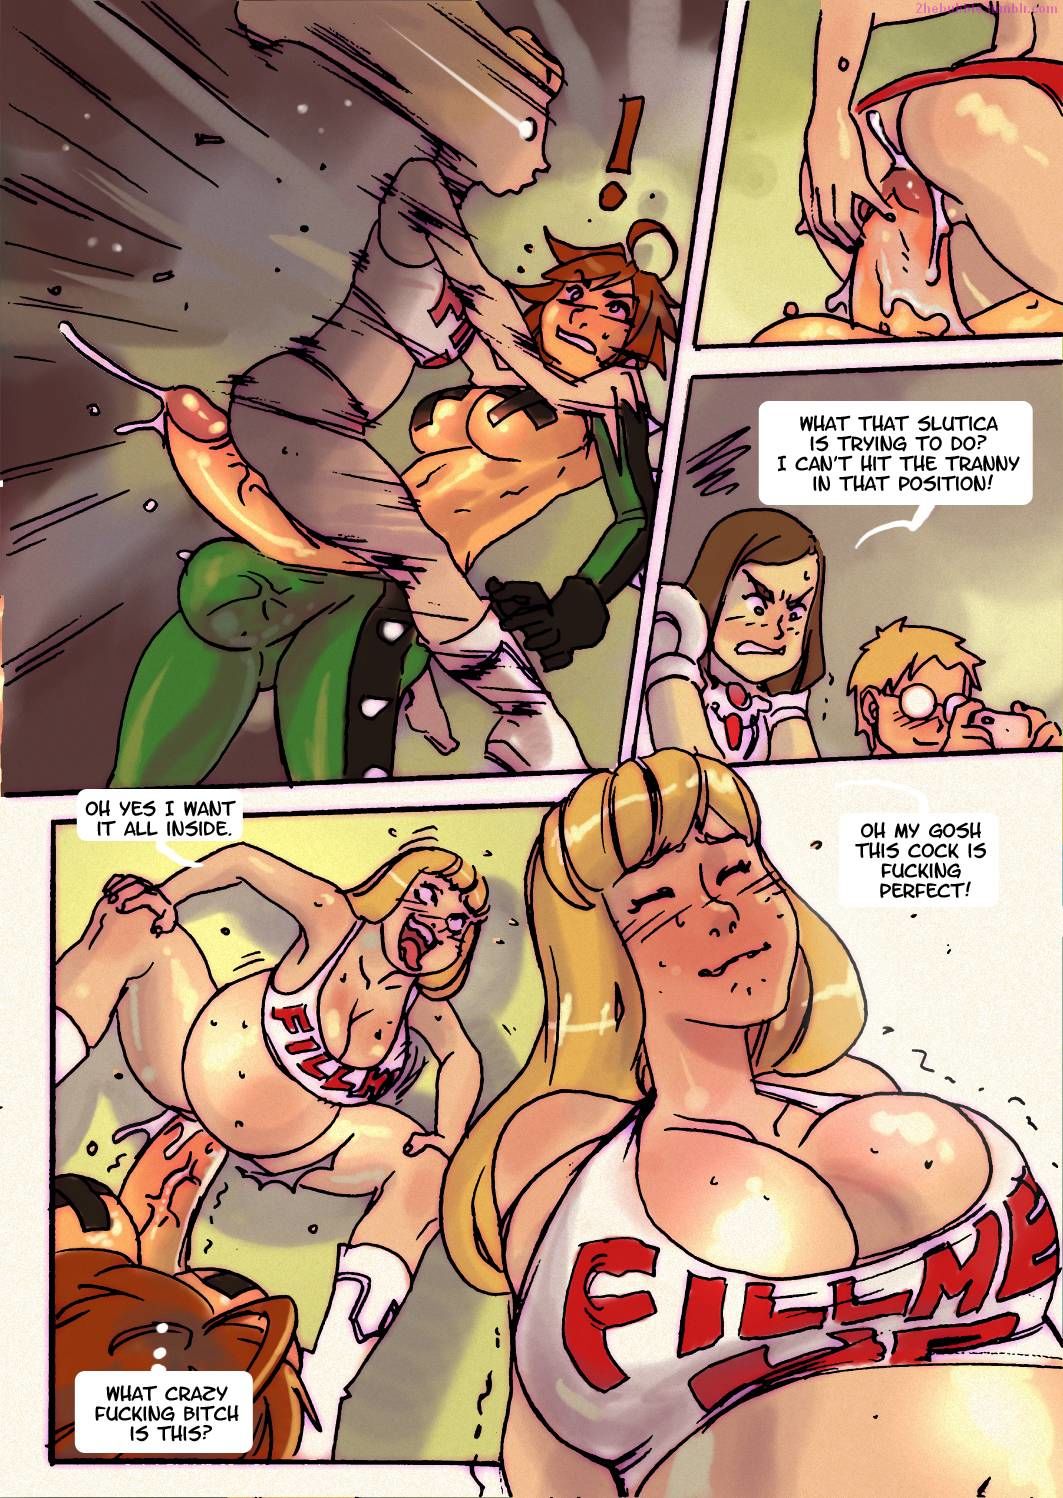 Swelling Invasion 2 page 9